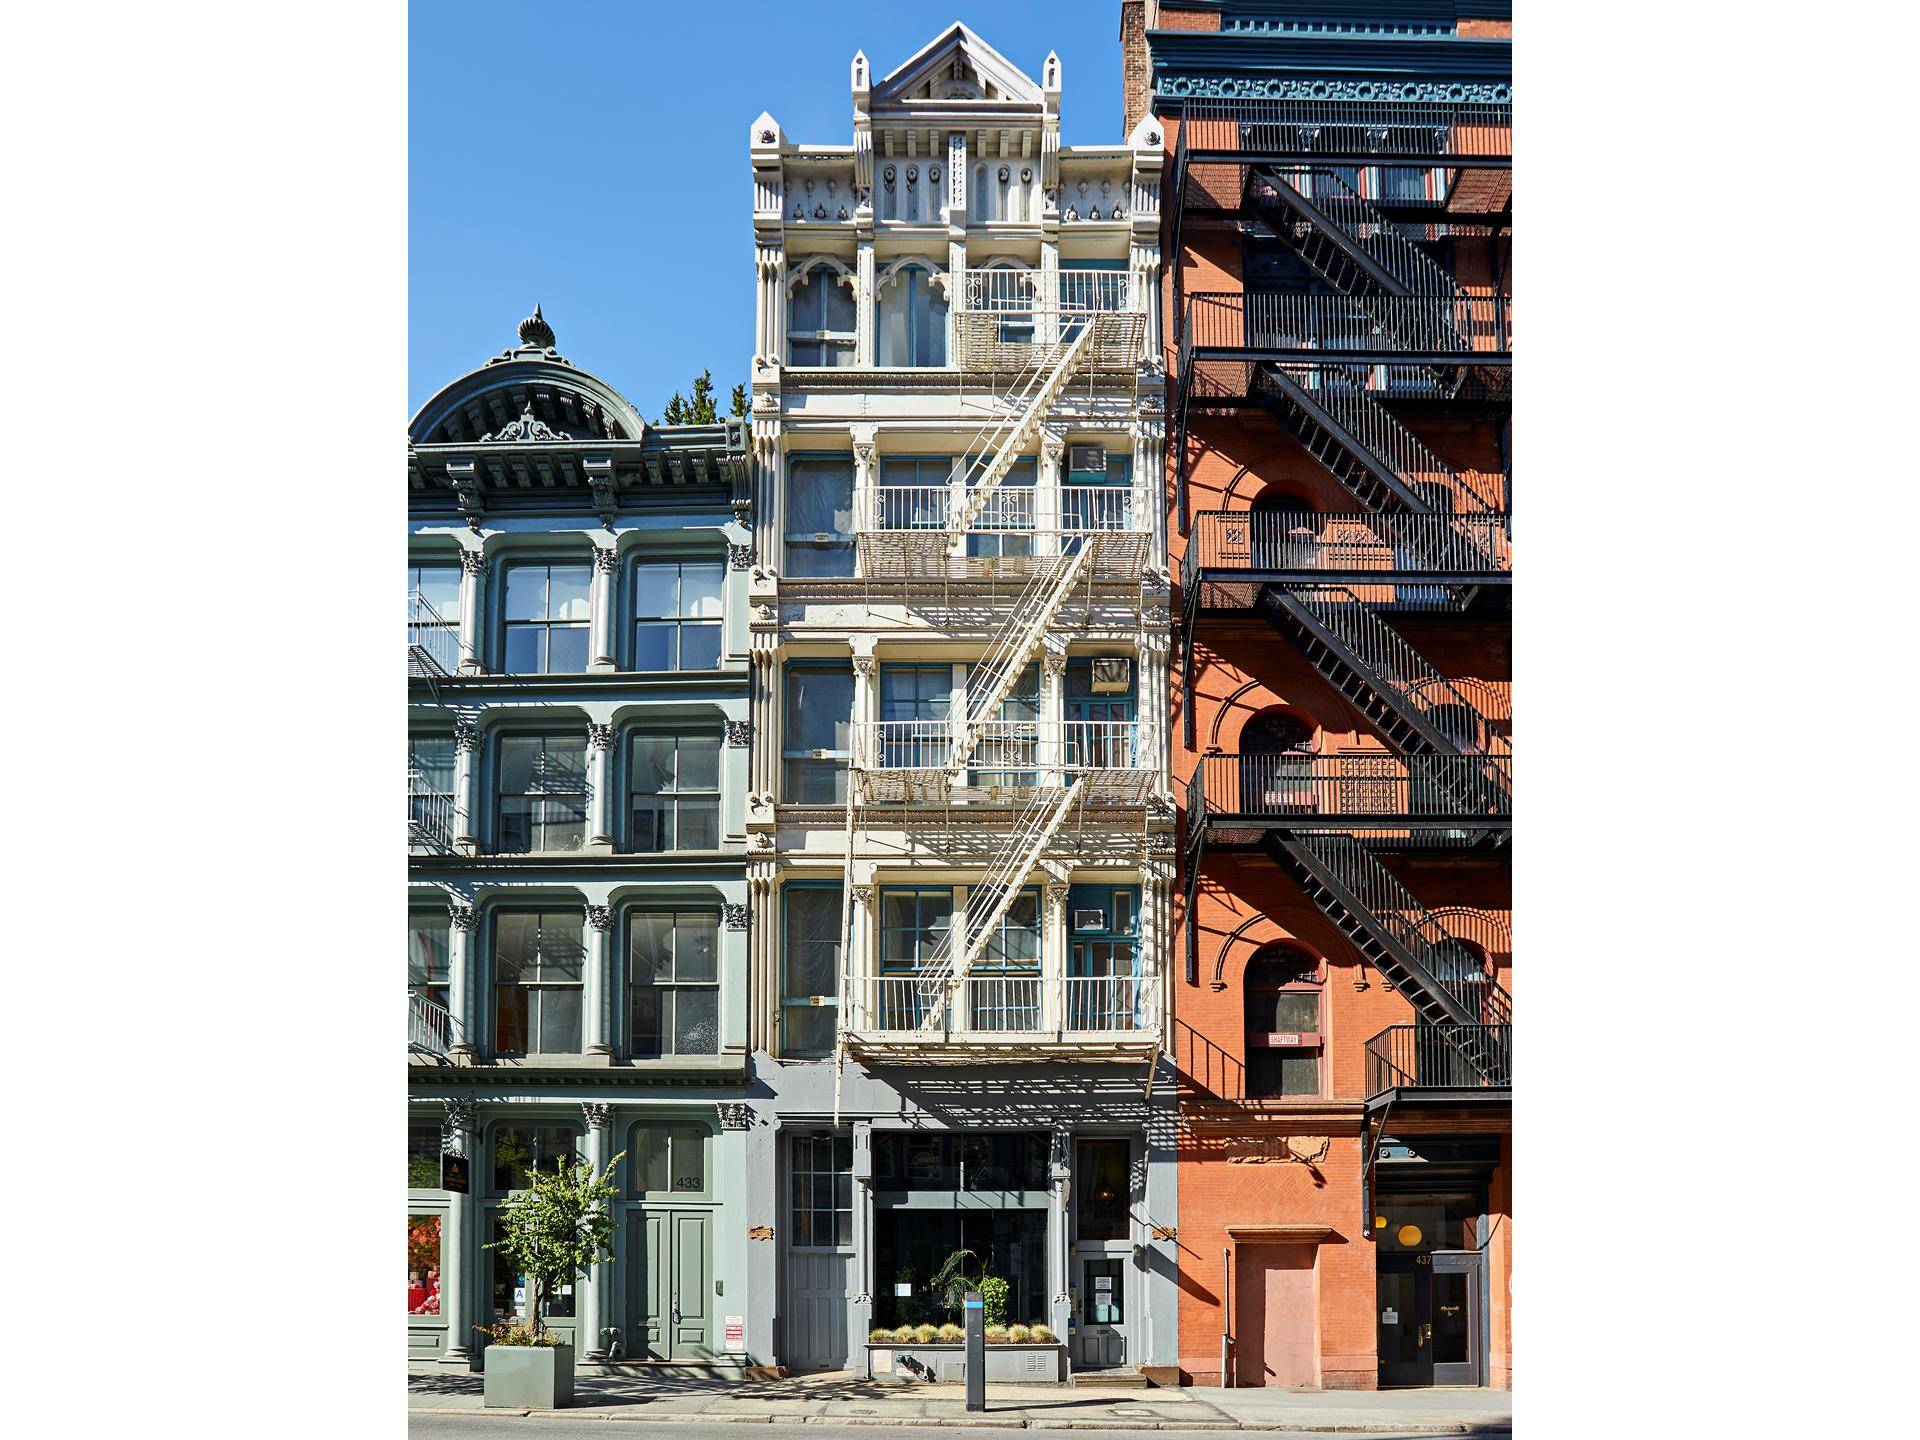 Custom built in 1873 by the great Gothic revival architect William Appleton Potter, this SoHo historic Cast Iron building offers a one of a kind opportunity to redevelop an iconic ...